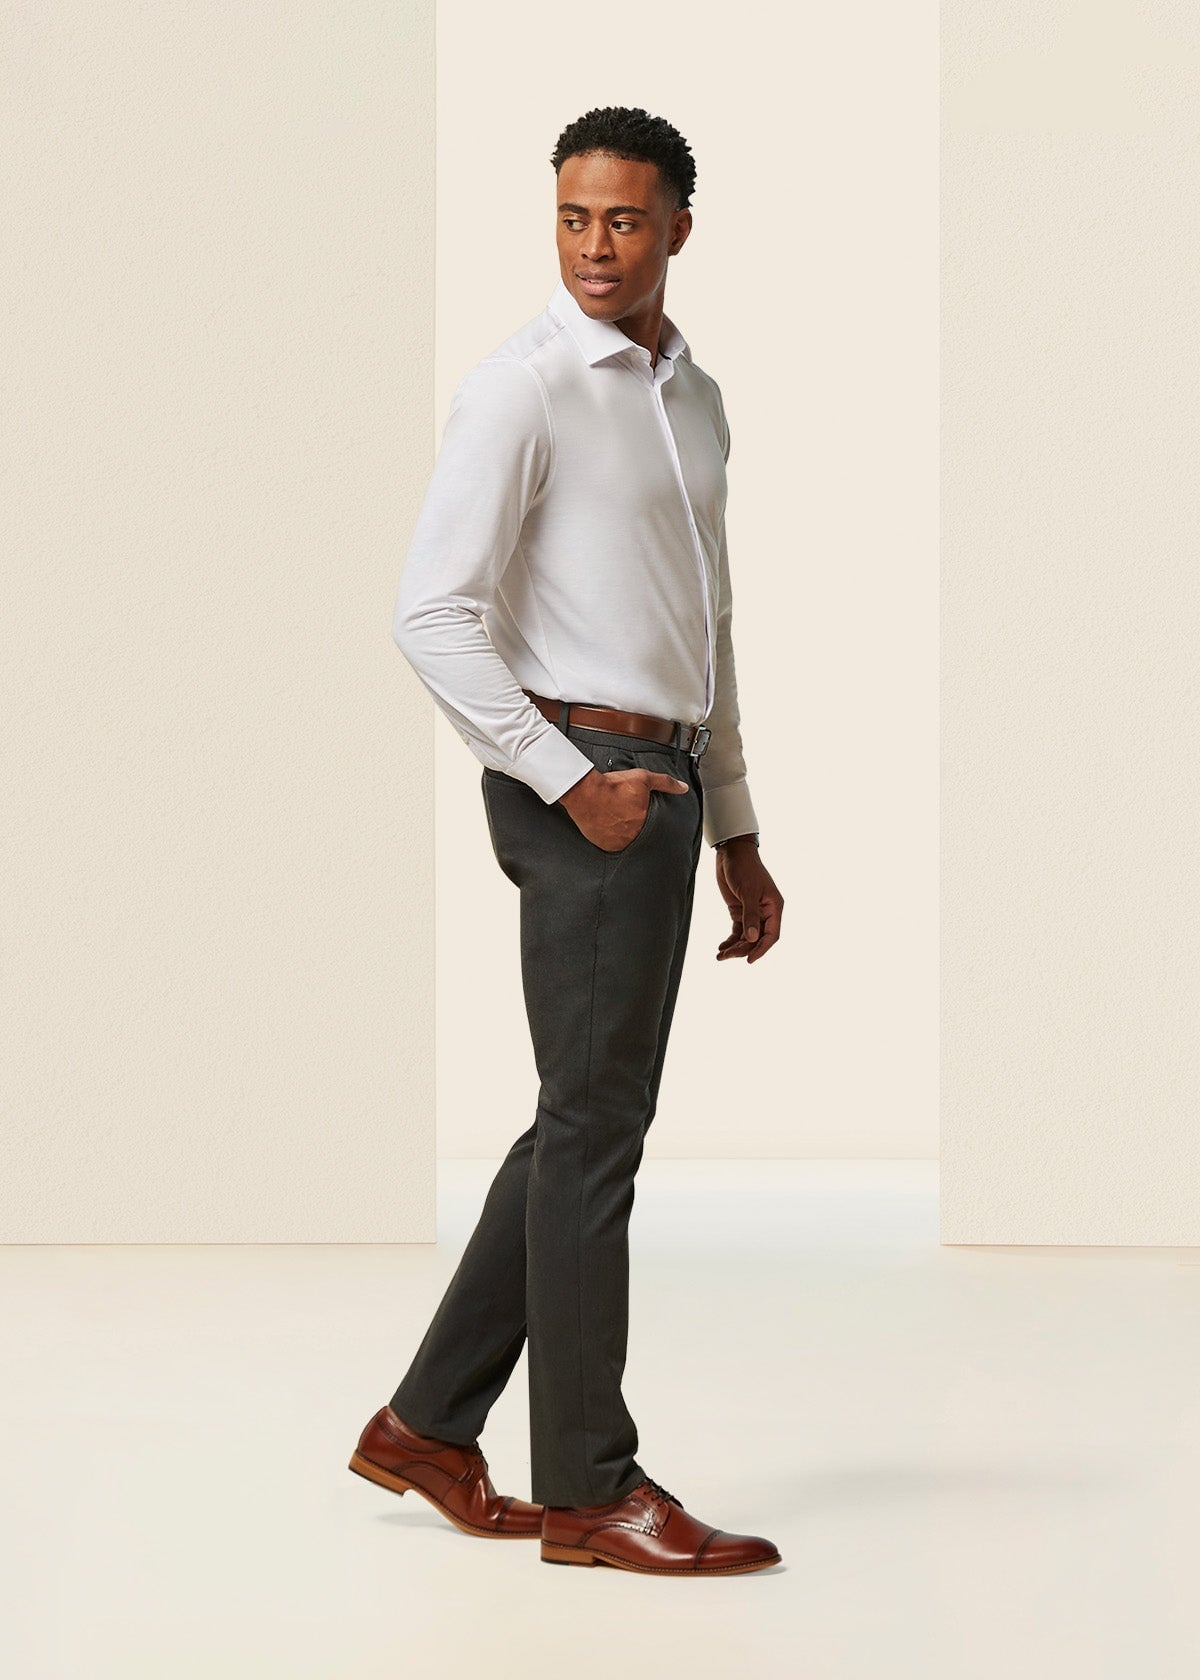 Men's Business Casual Clothing - DUER